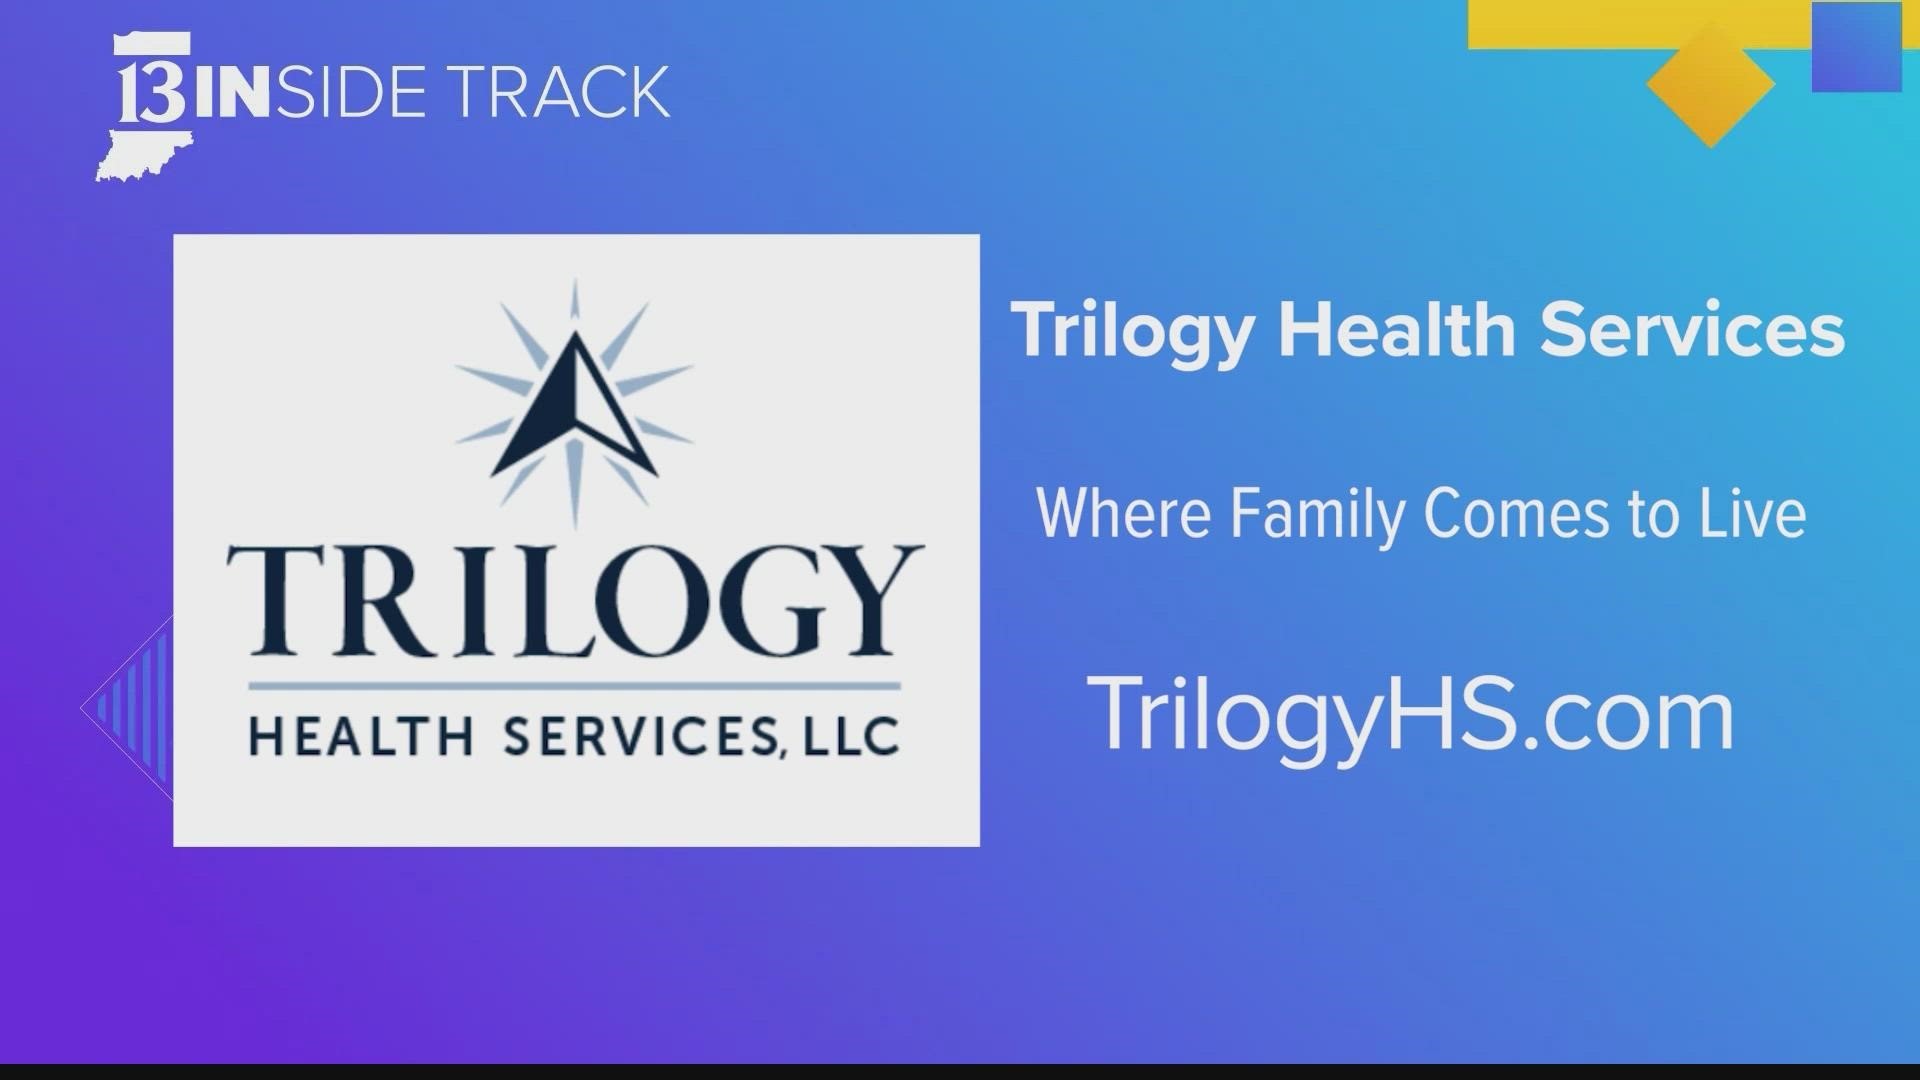 Trilogy Health Services provides senior living for Hoosiers.